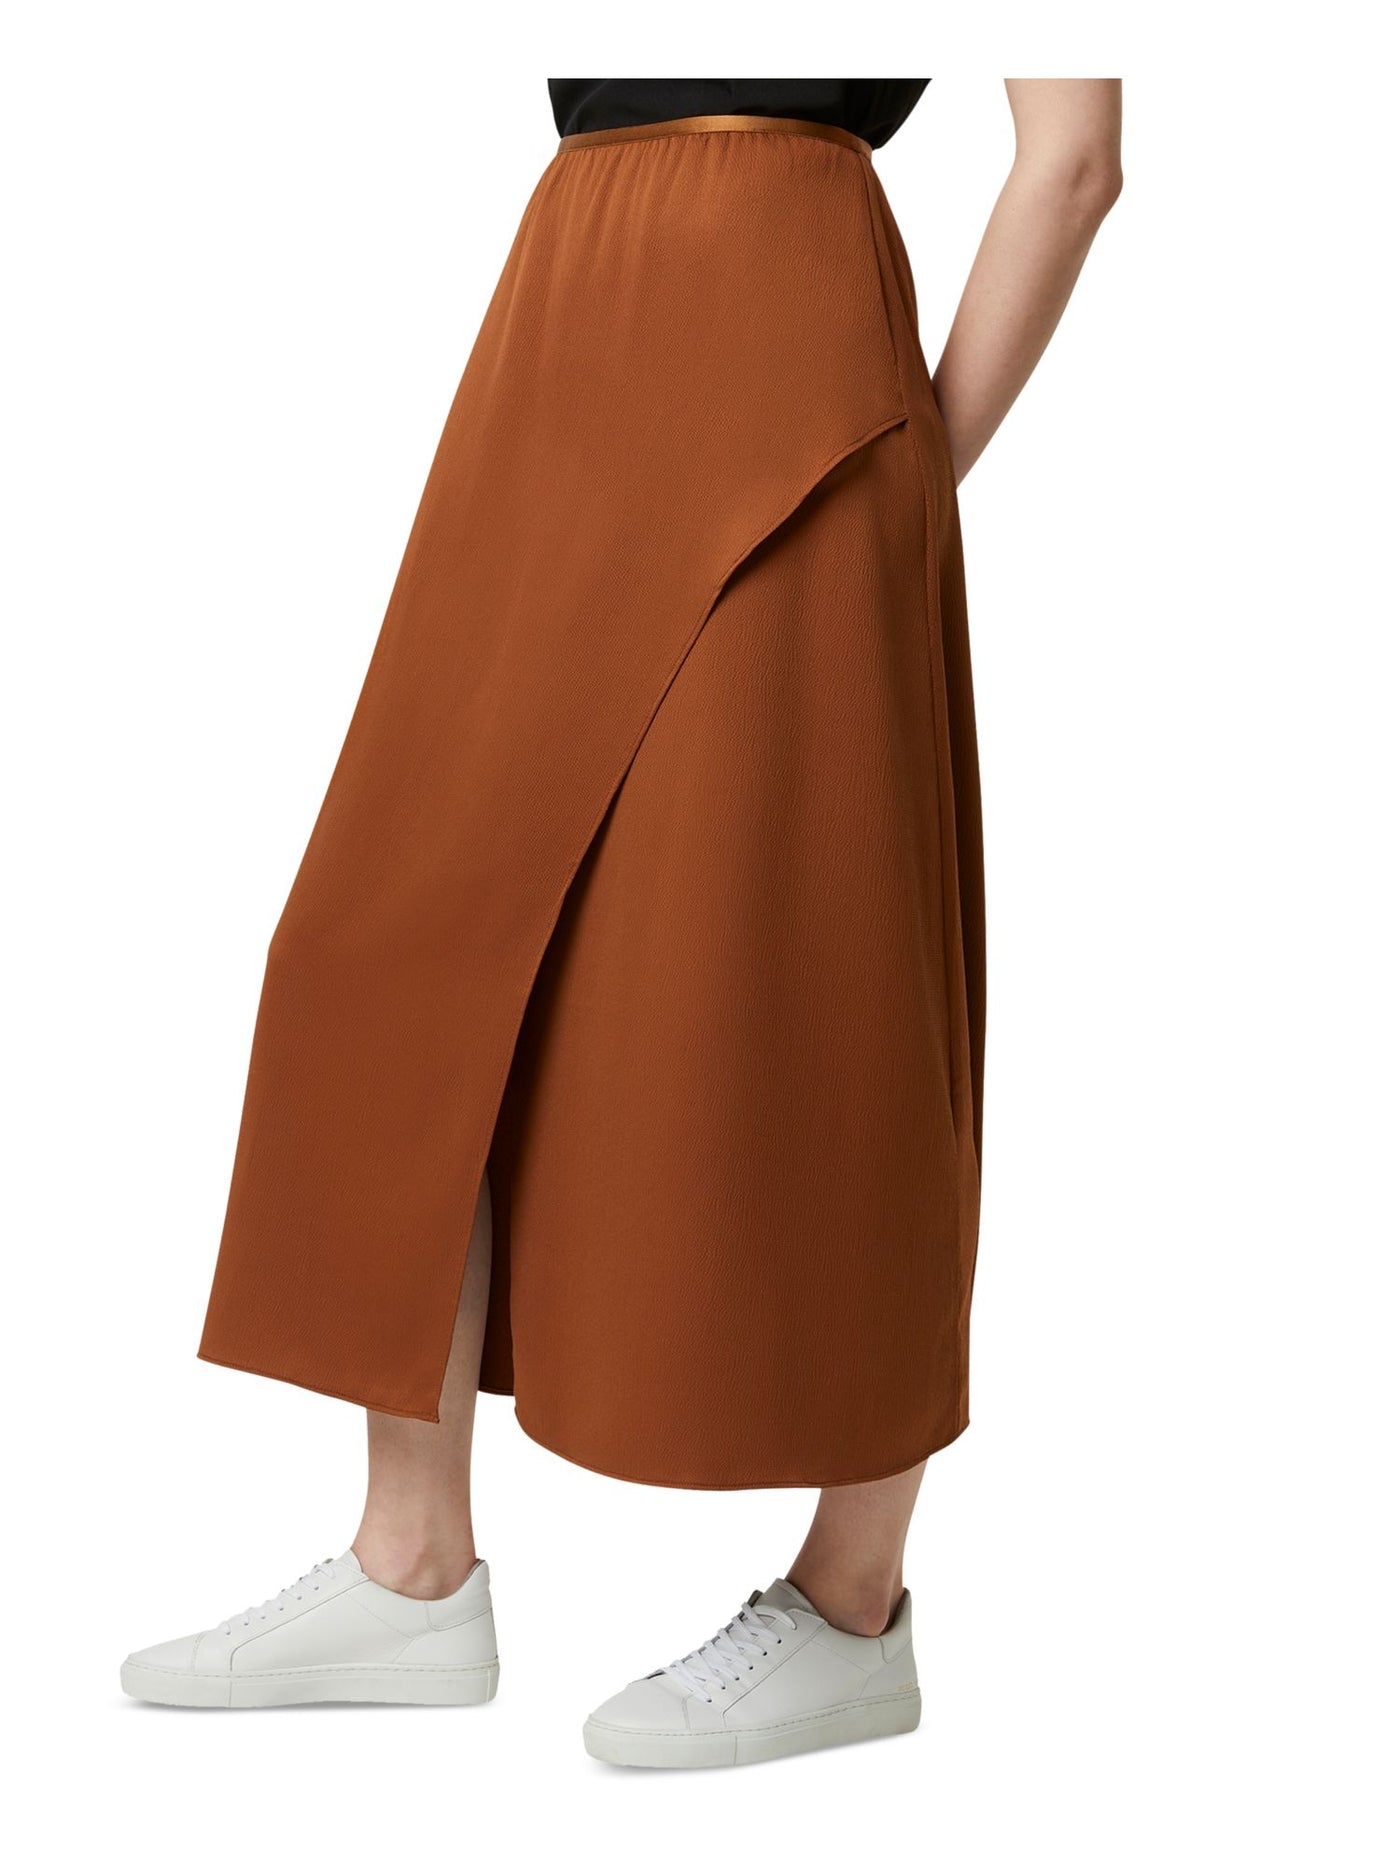 FRENCH CONNECTION Womens Brown Gathered Drapped Front Tea-Length Wrap Skirt XS